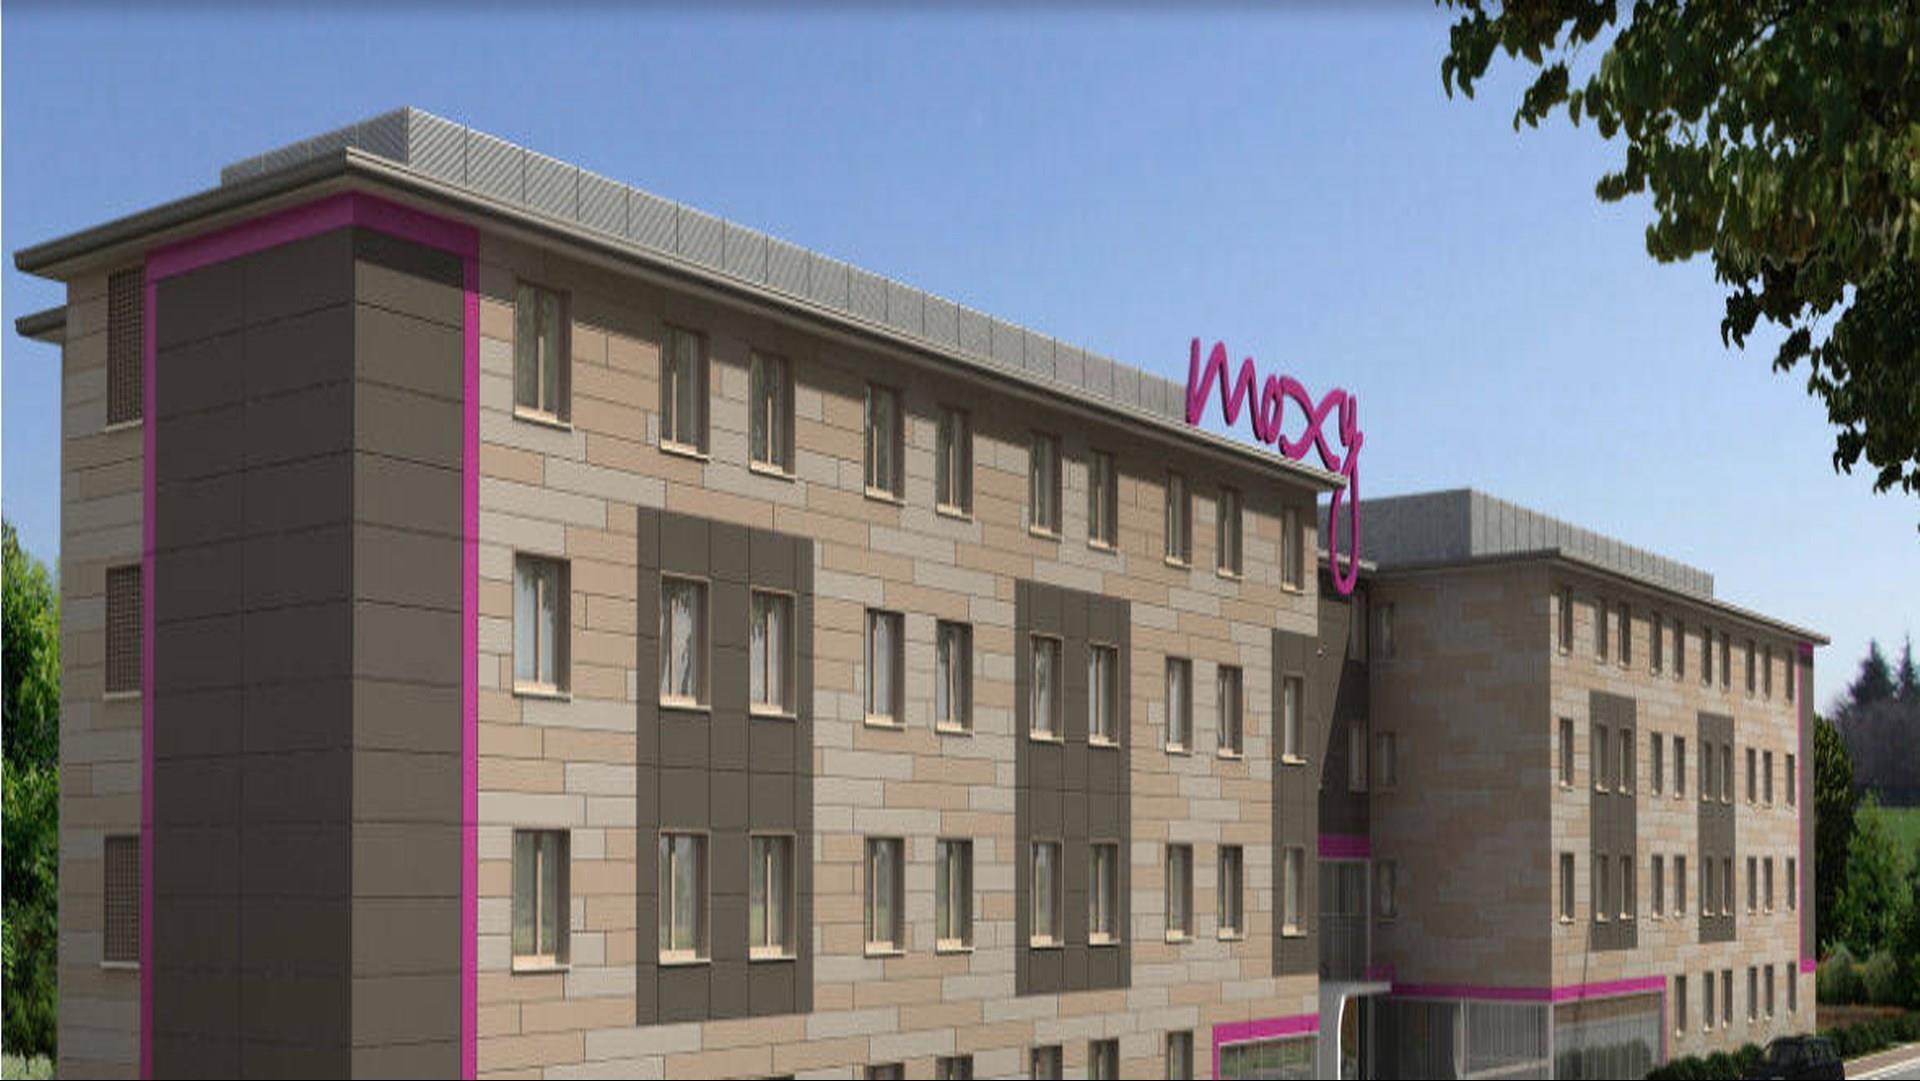 Moxy Chattanooga Downtown in Chattanooga, TN